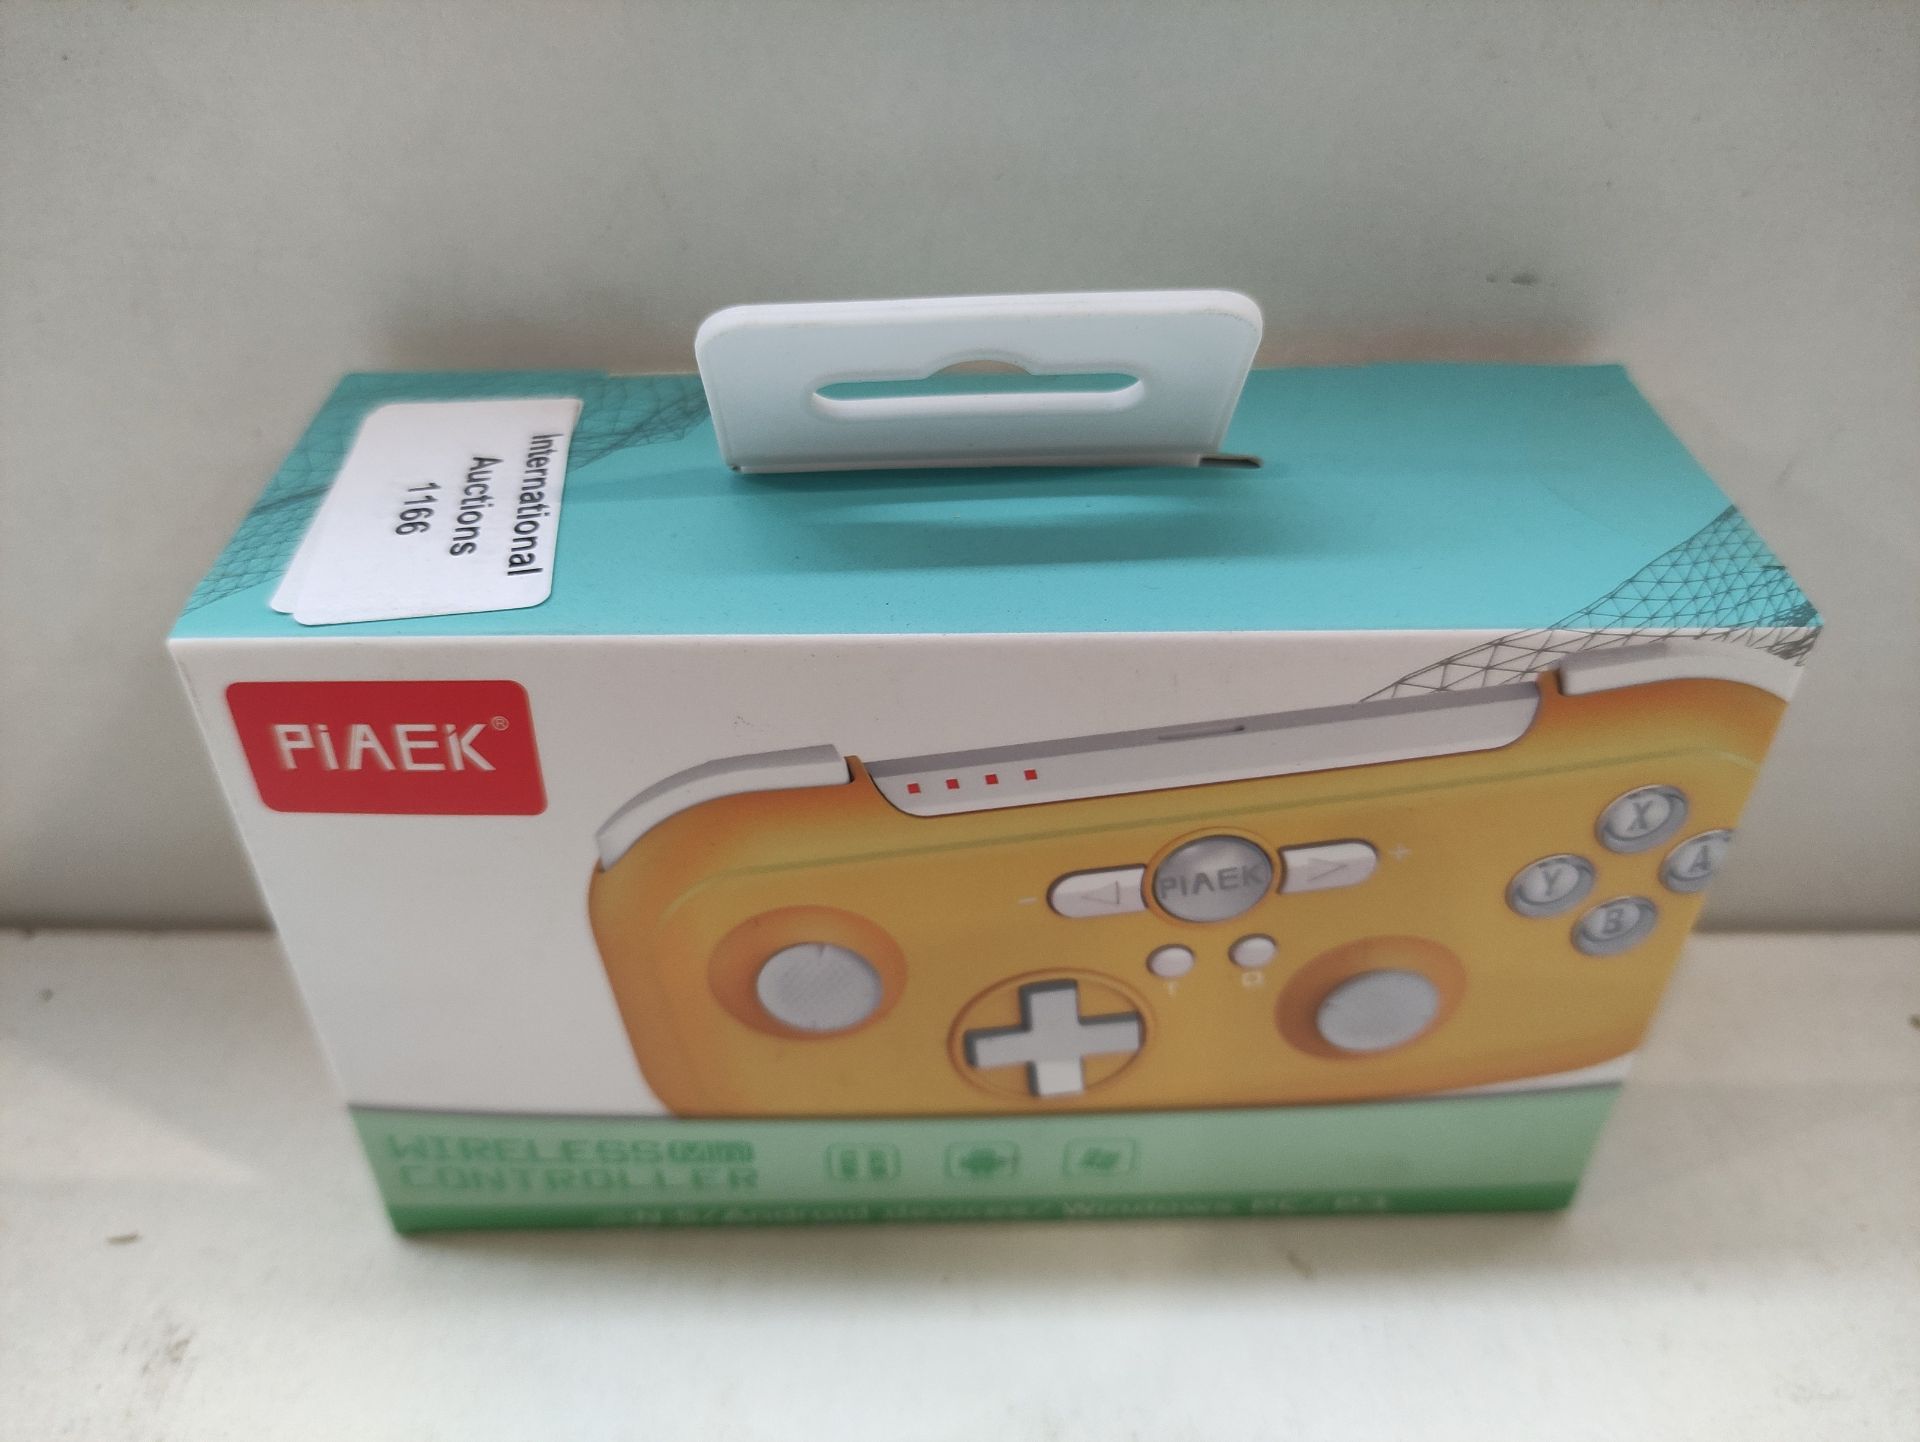 RRP £15.98 PiAEK Controller for Nintendo Switch 6-Axis sensor - Image 2 of 2